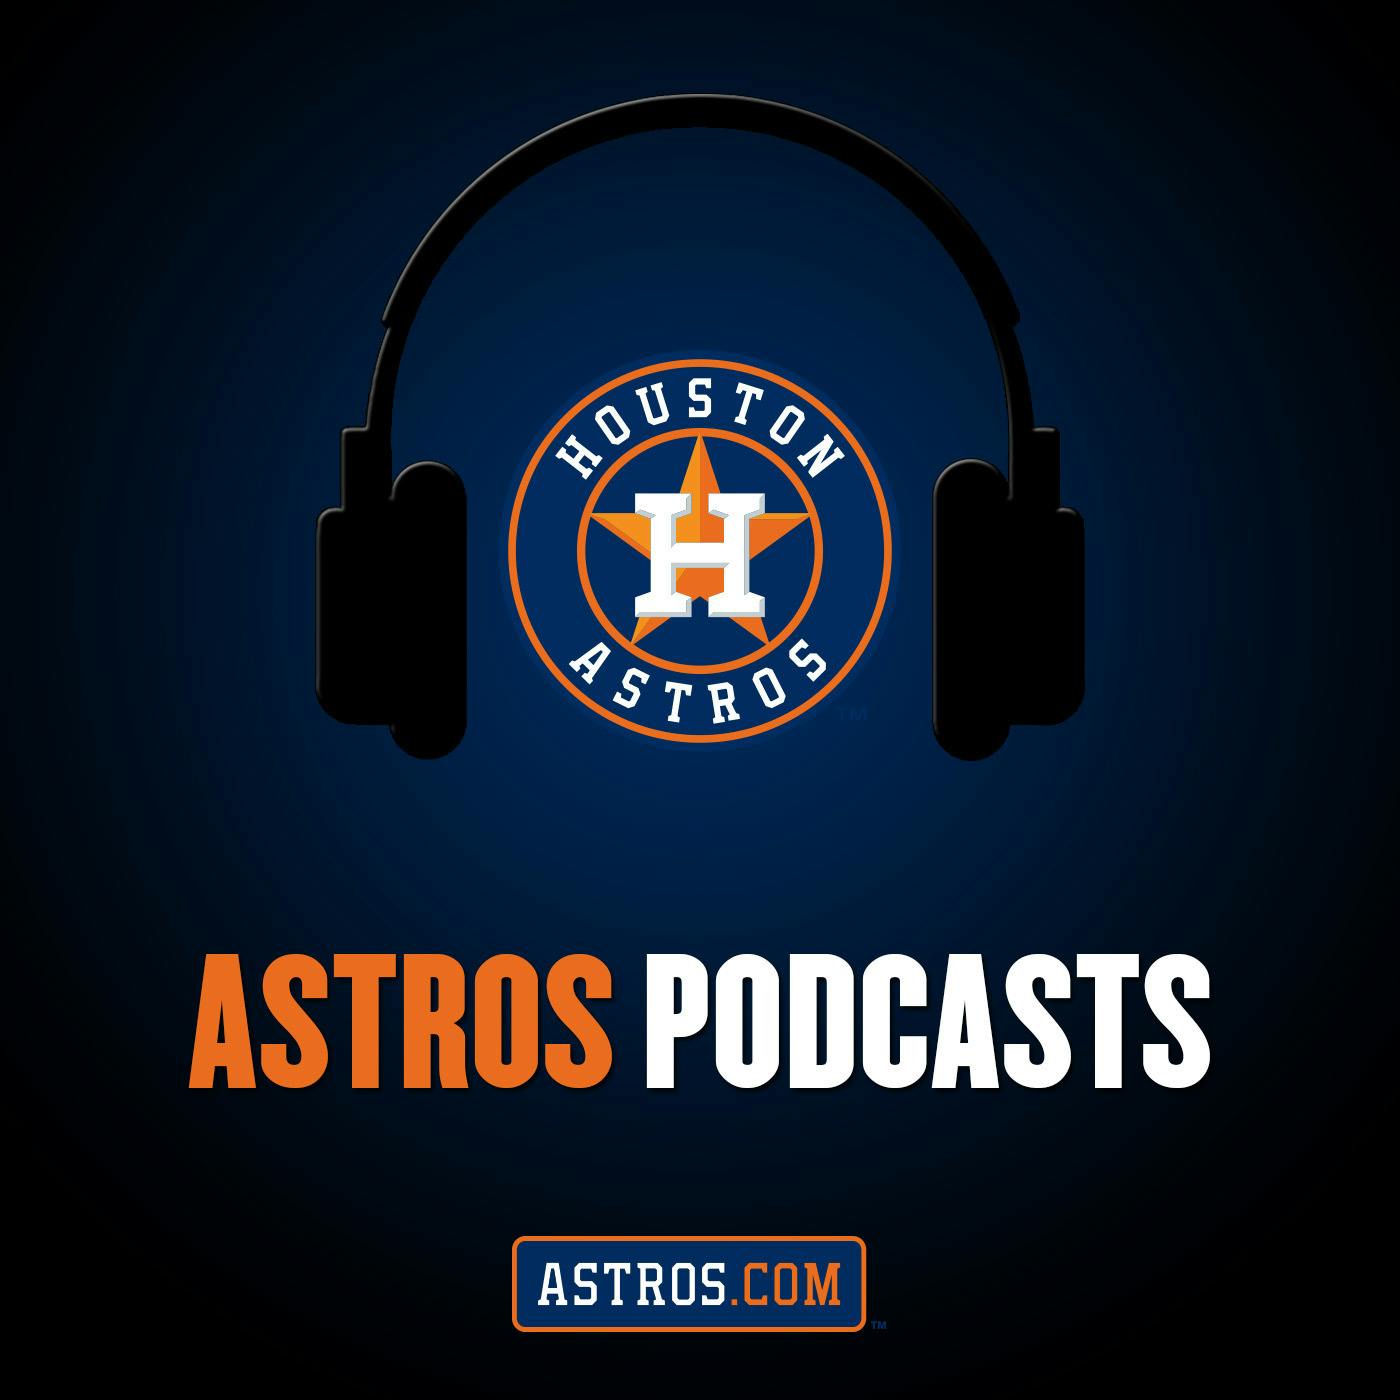 8/12 ASTROCAST presented by KARBACH featuring Dusty Baker, George Springer, Abraham Toro, Chase De Jong